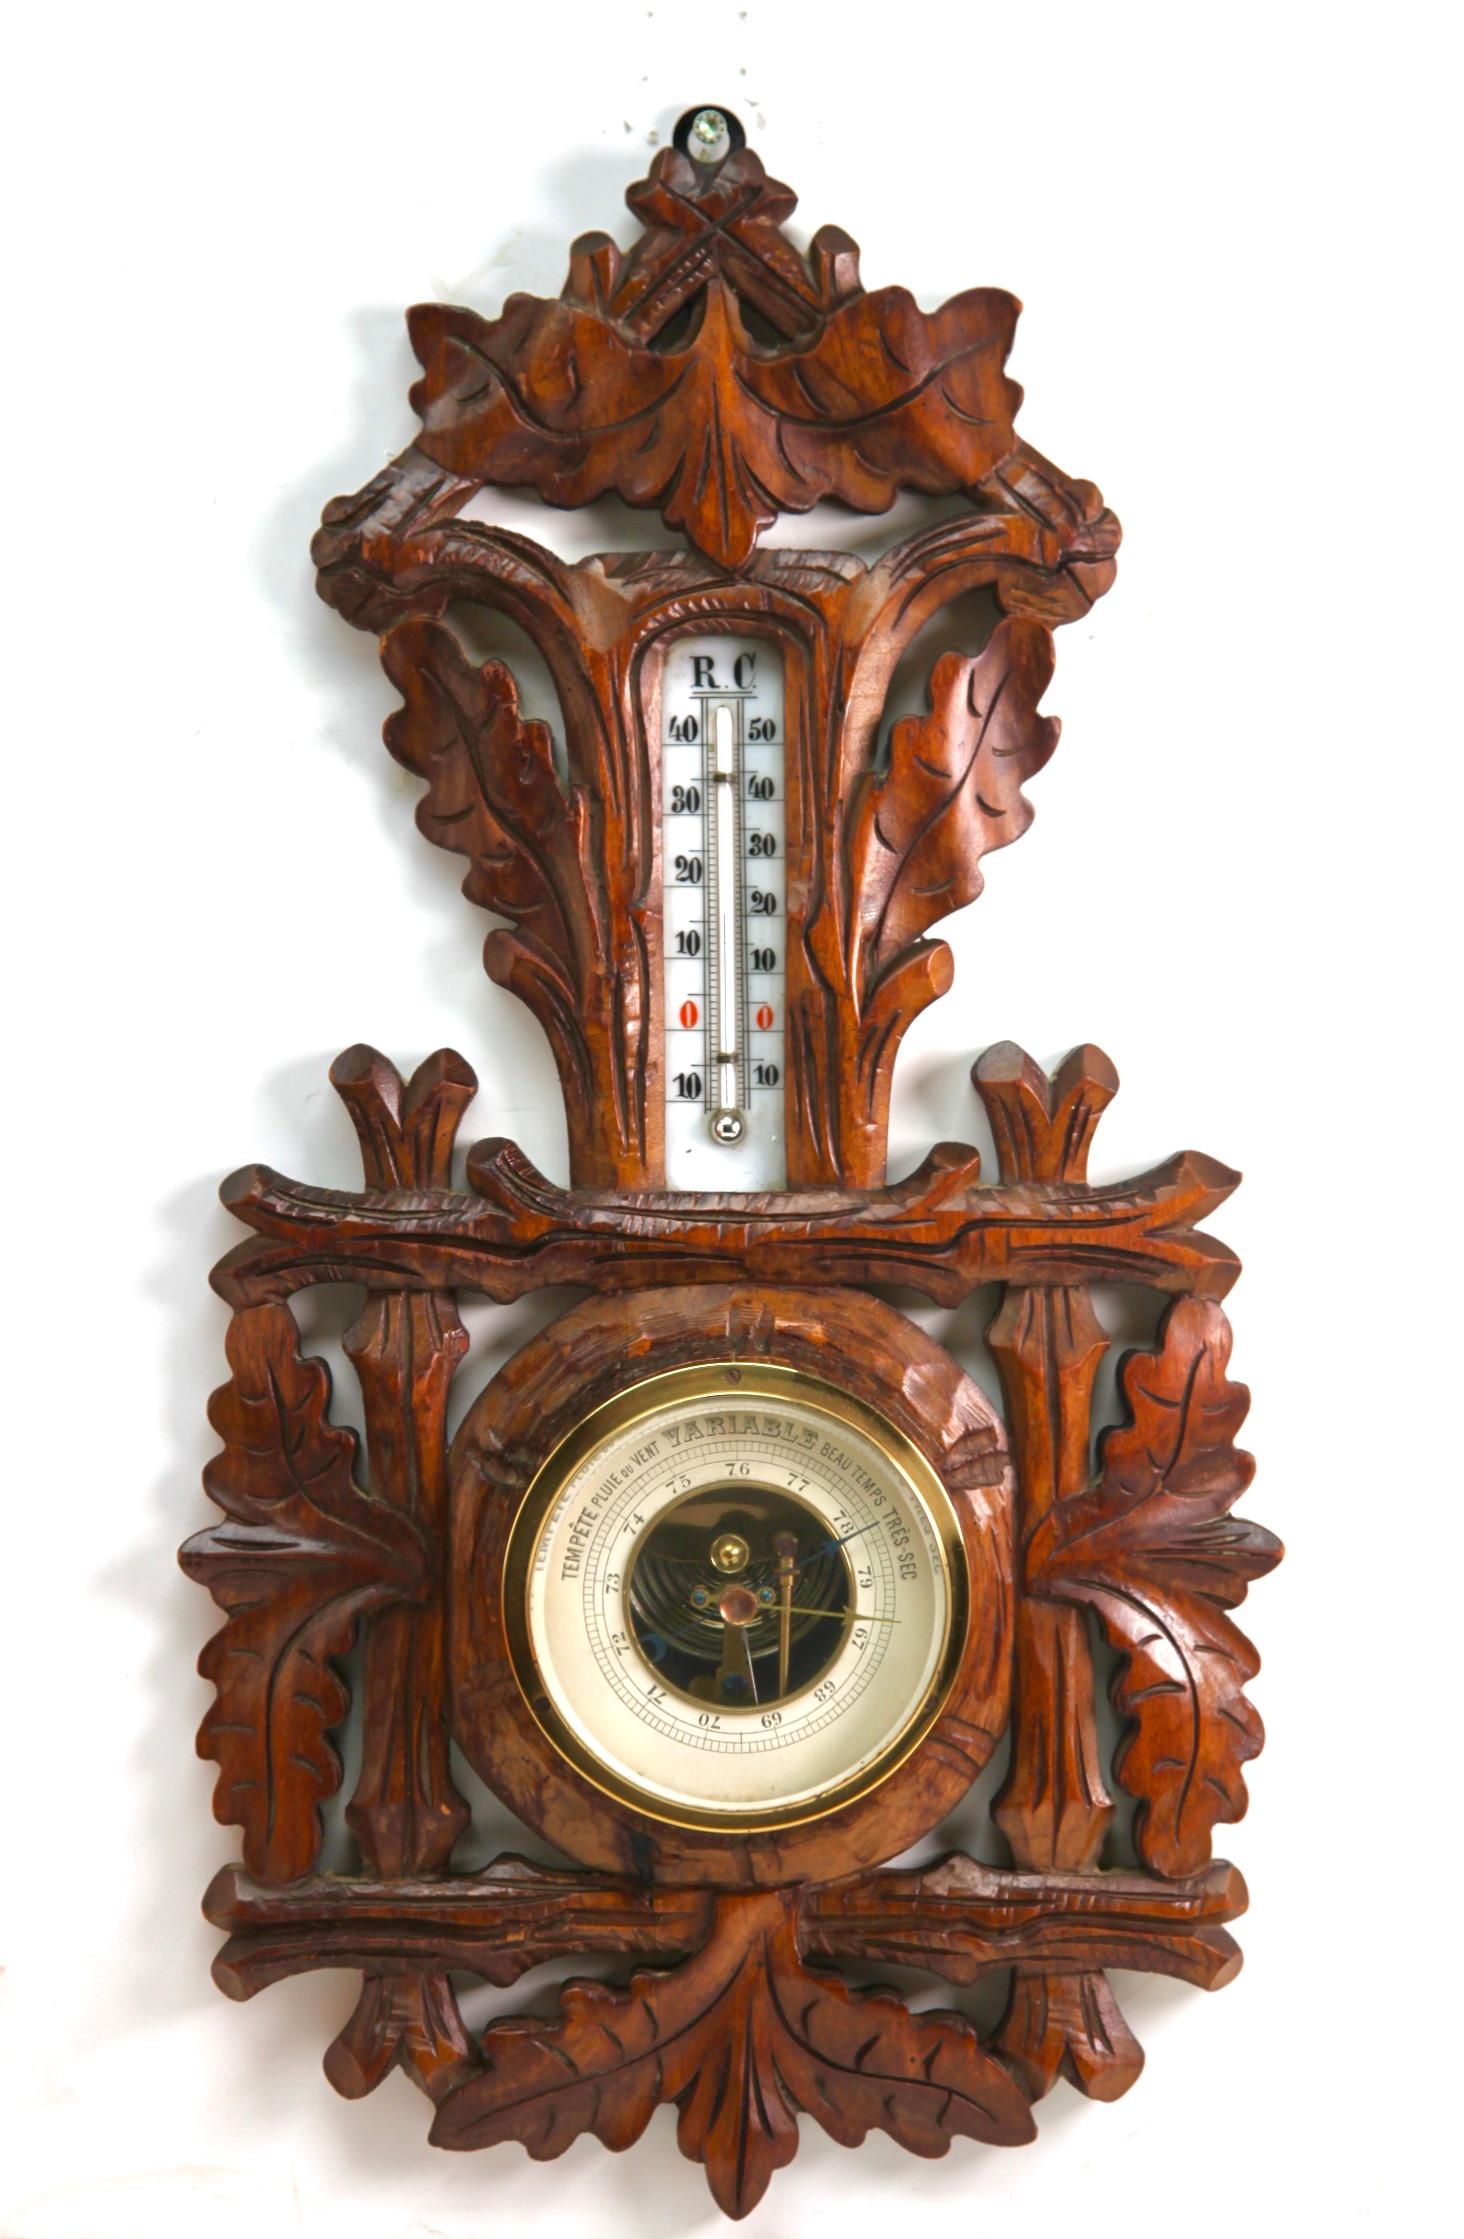 Carved wooden antique French barometer with thermometer
Unusual antique carved wooden barometer in a lovely carved case, working order.
Number 9432
 

With best wishes,